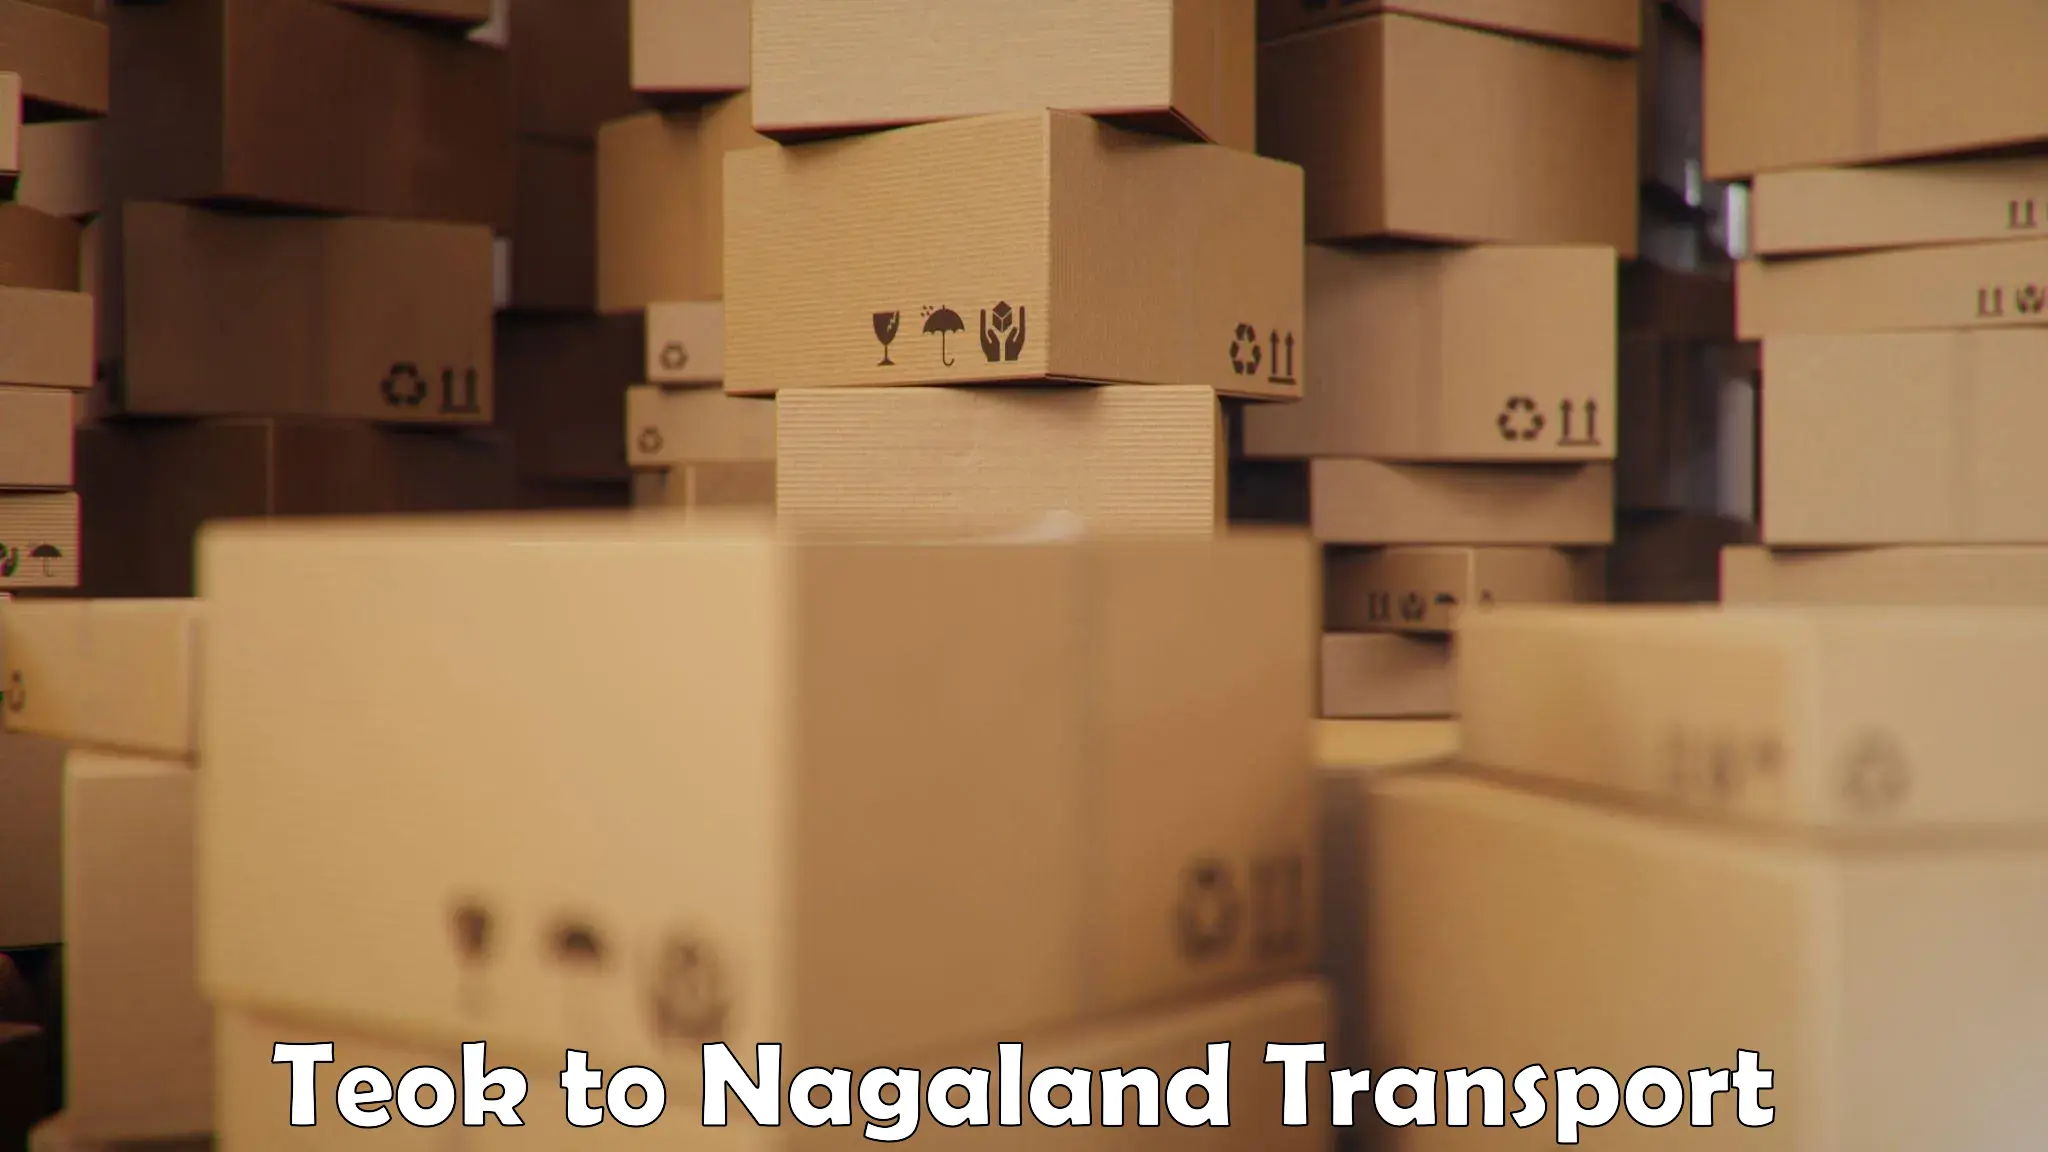 Air cargo transport services in Teok to NIT Nagaland